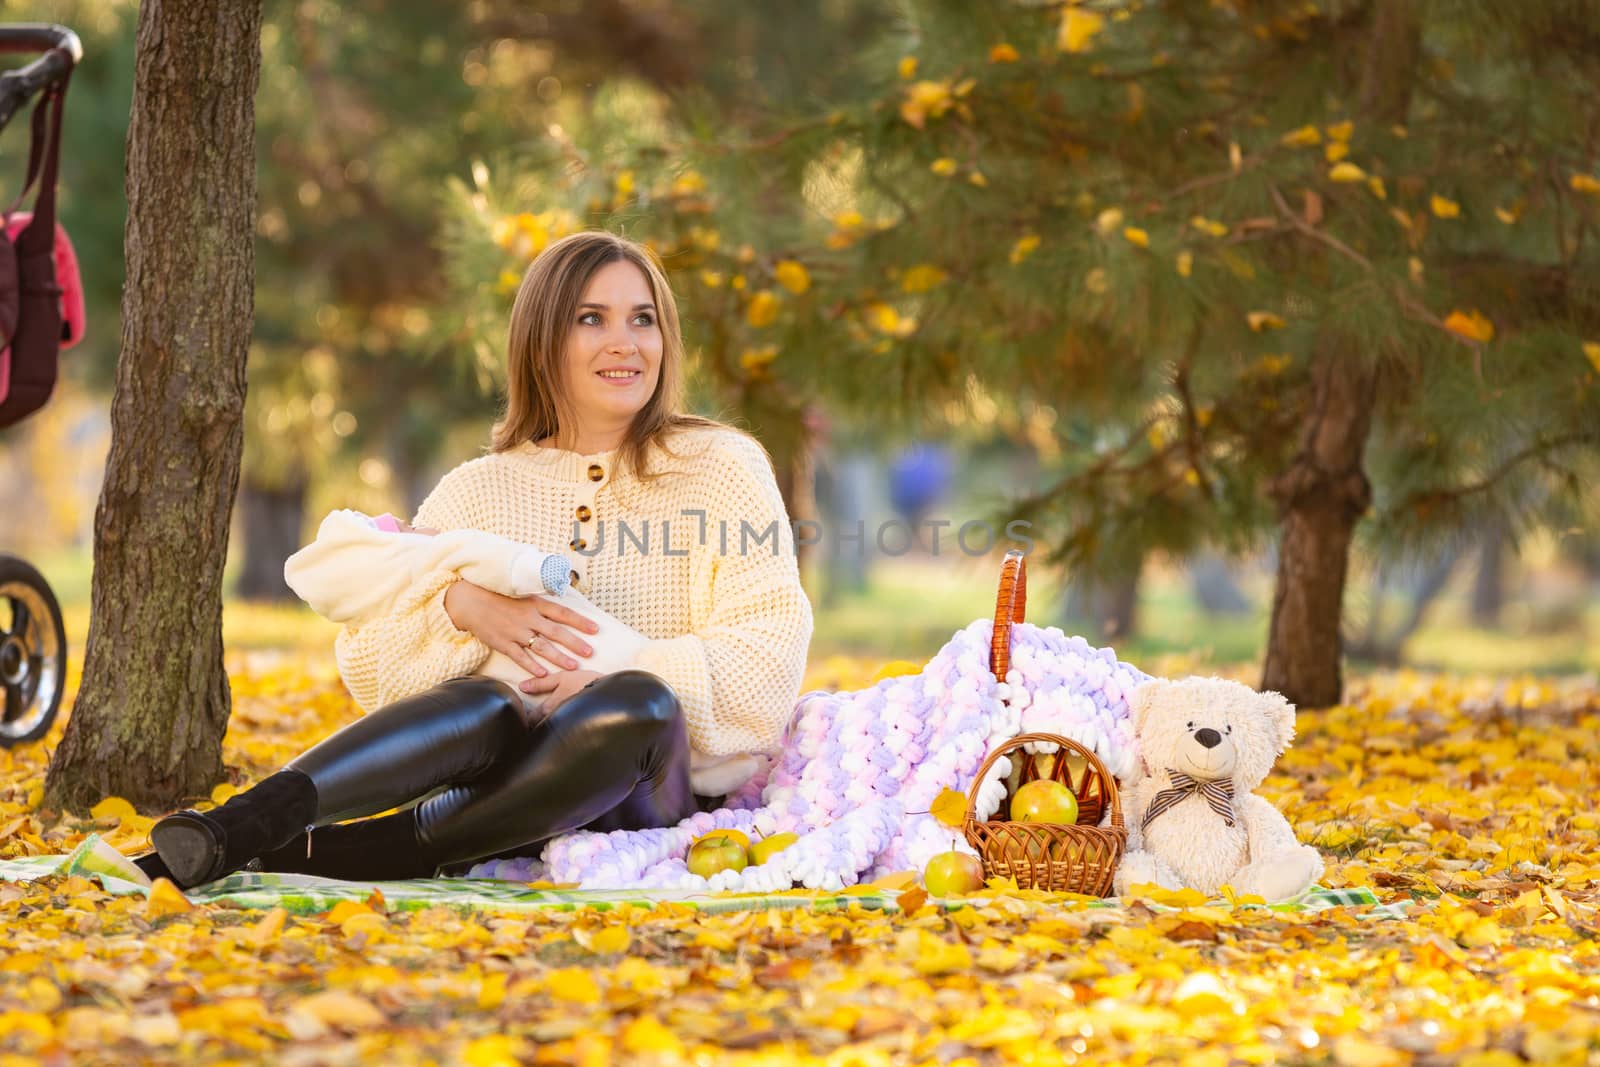 Mom sits on a picnic in the autumn park, holding a newborn baby in her arms